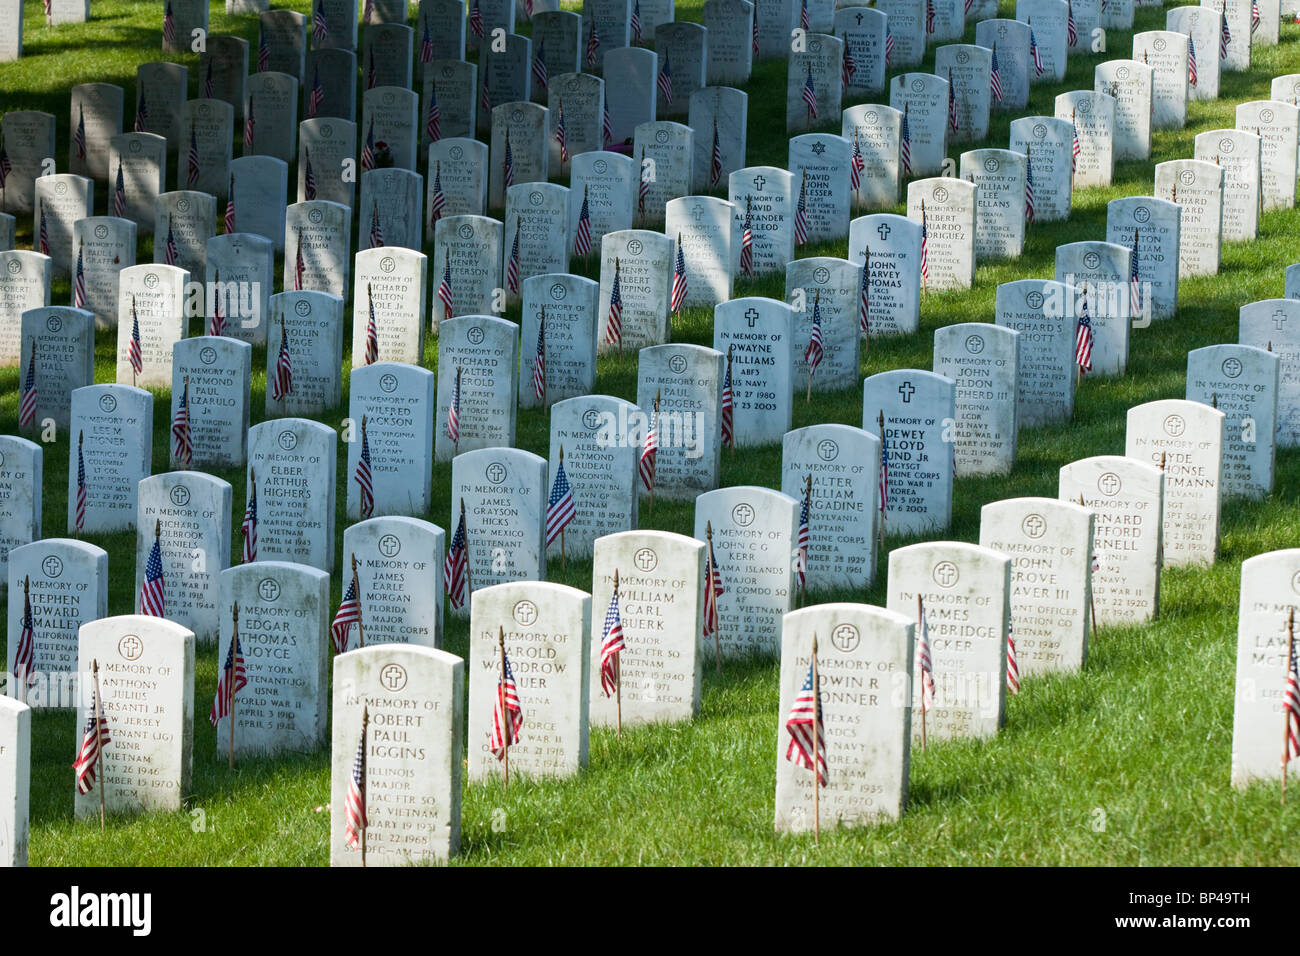 An American flag lines each gravestone in remembrance of soldiers killed in battle on Memorial Day in Arlington National Cemeter Stock Photo